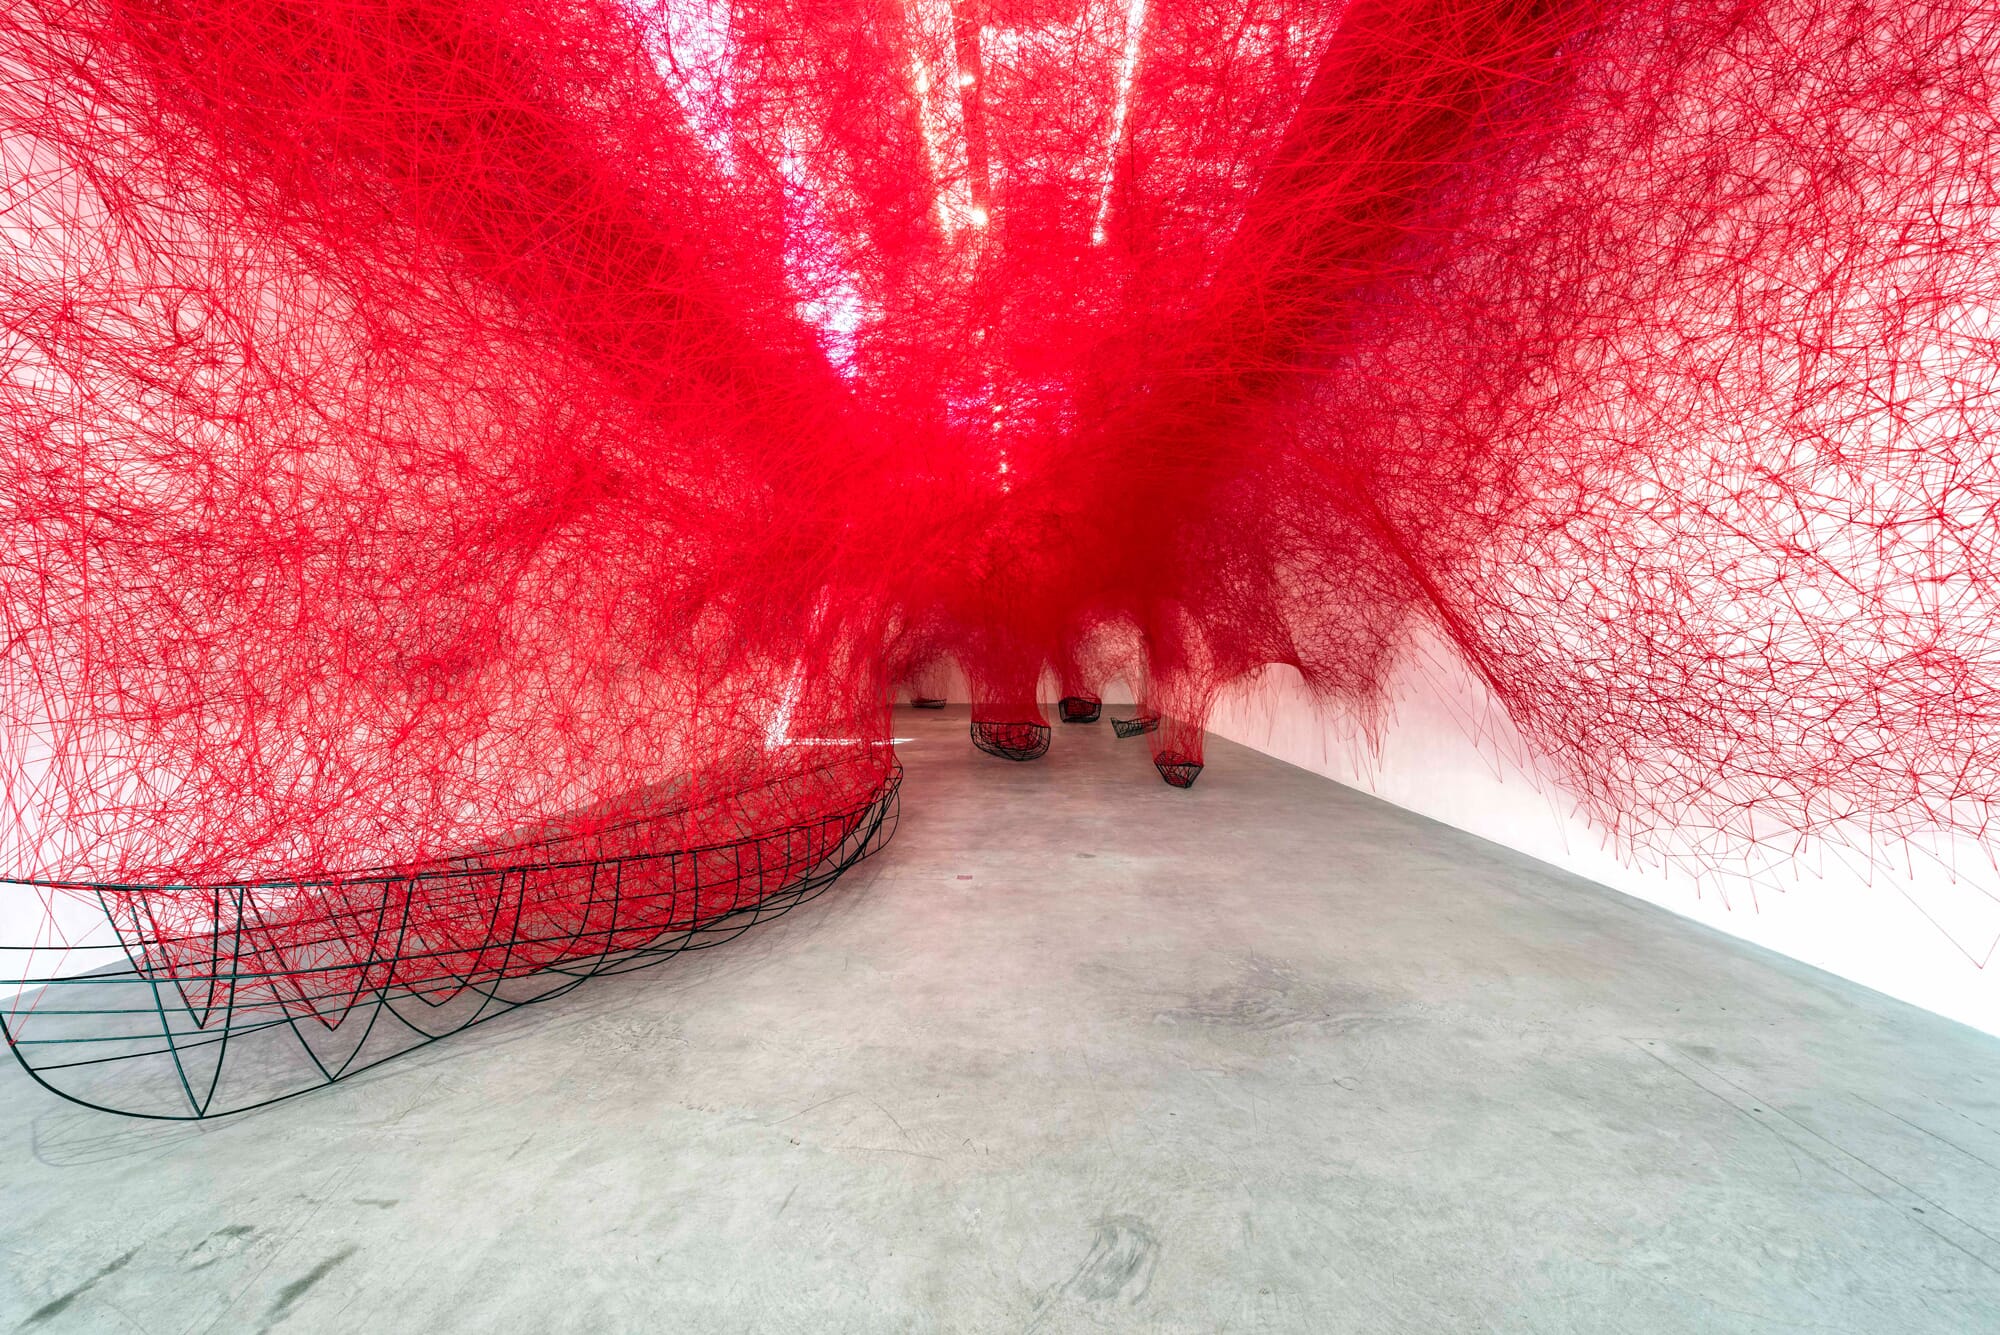 chiharu-shiota-uncertain-journey-2016-installation-view-courtesy-the-artist-and-blainsouthern-photo-christian-glaeser